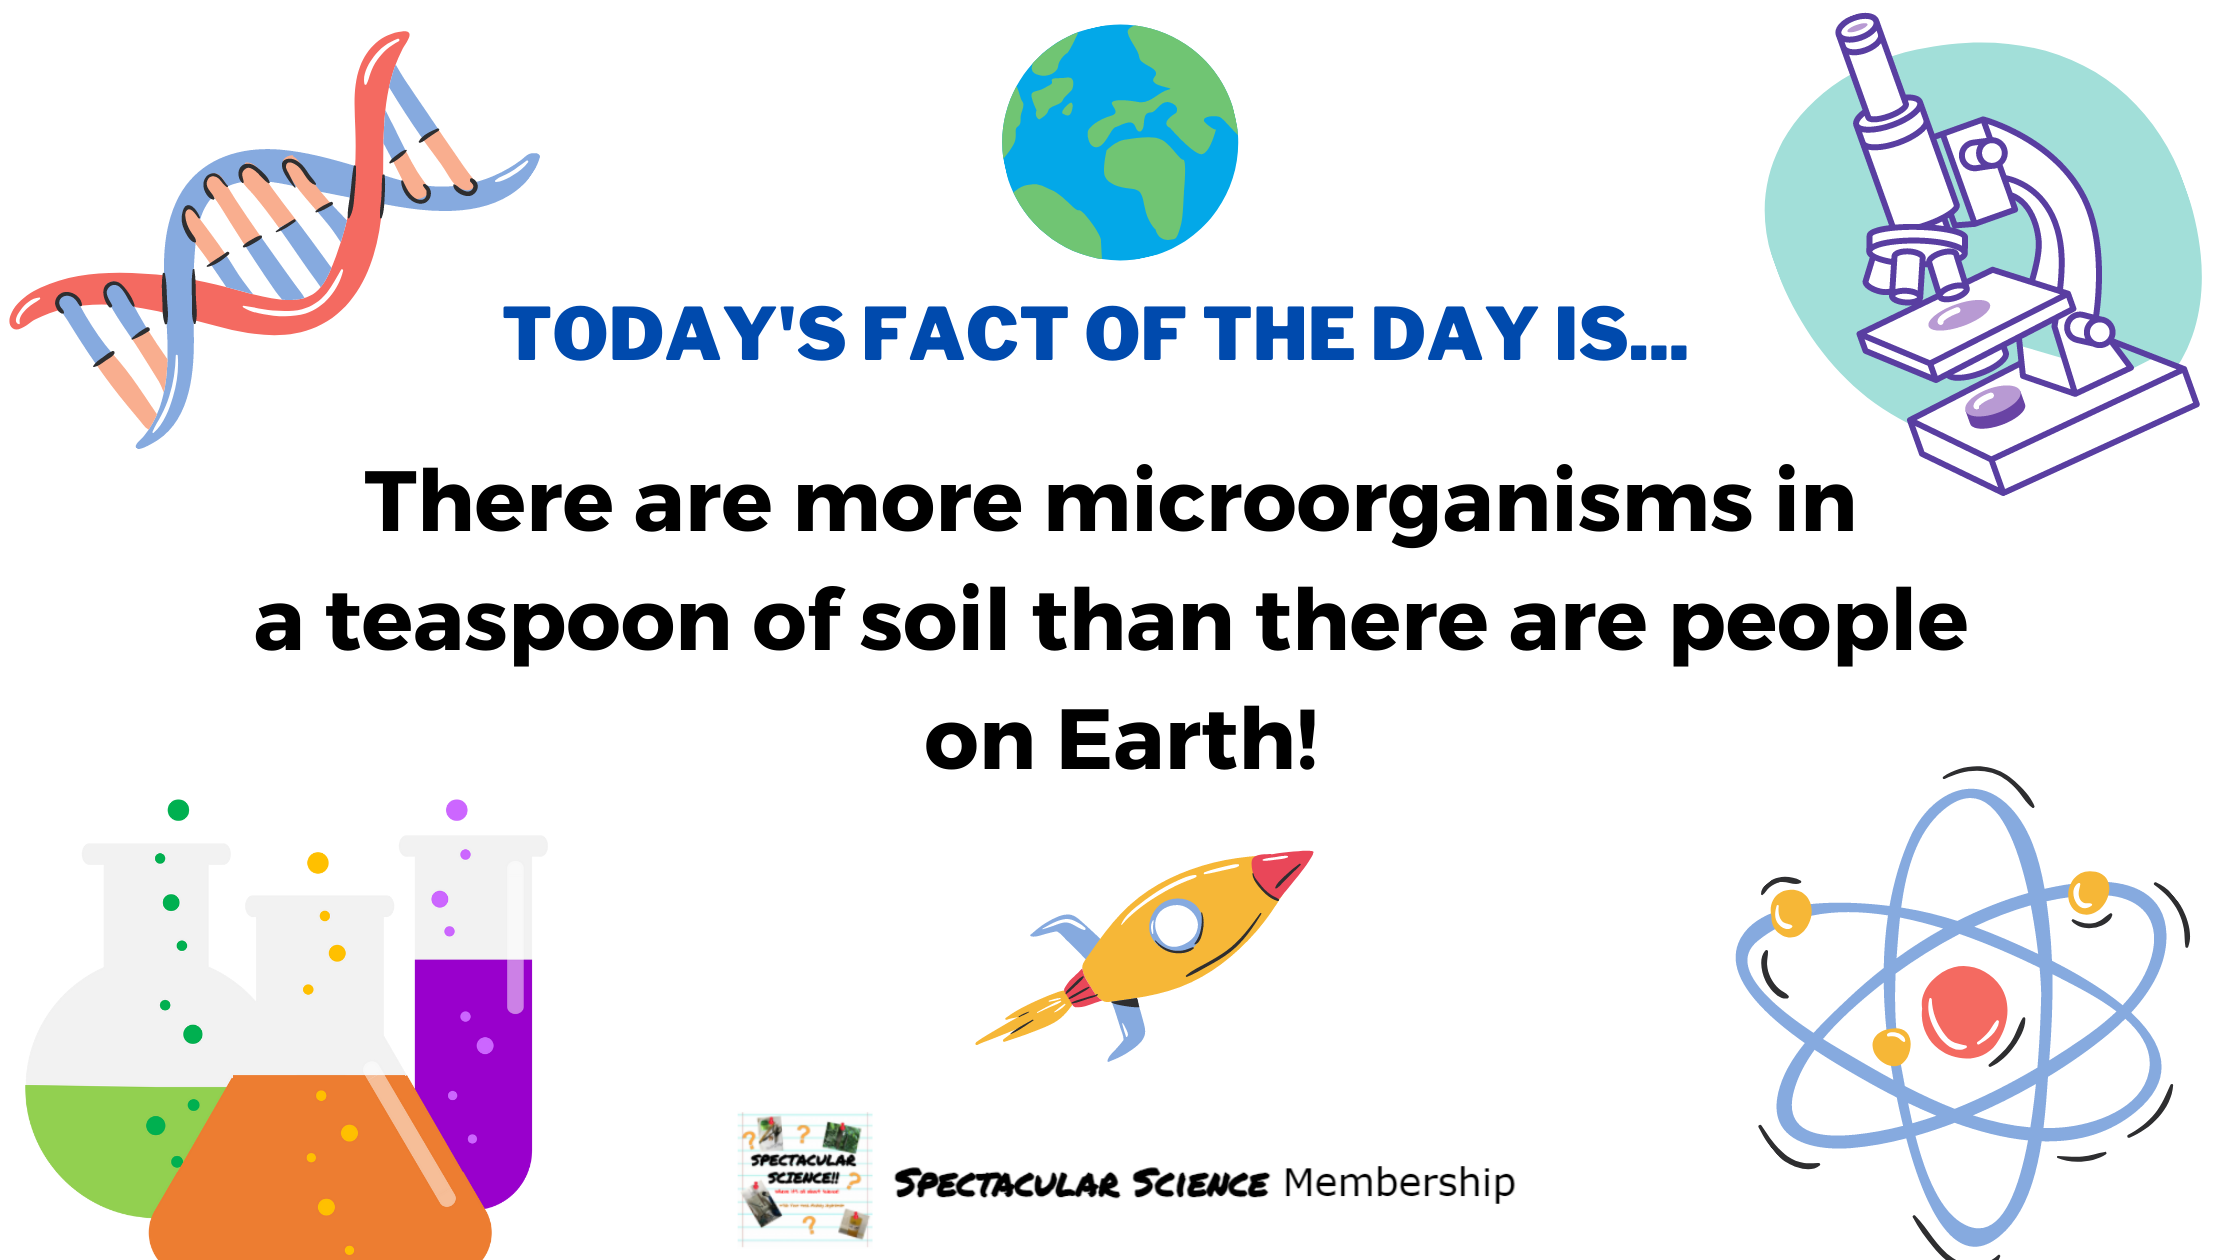 Fact of the Day Image Dec. 5th